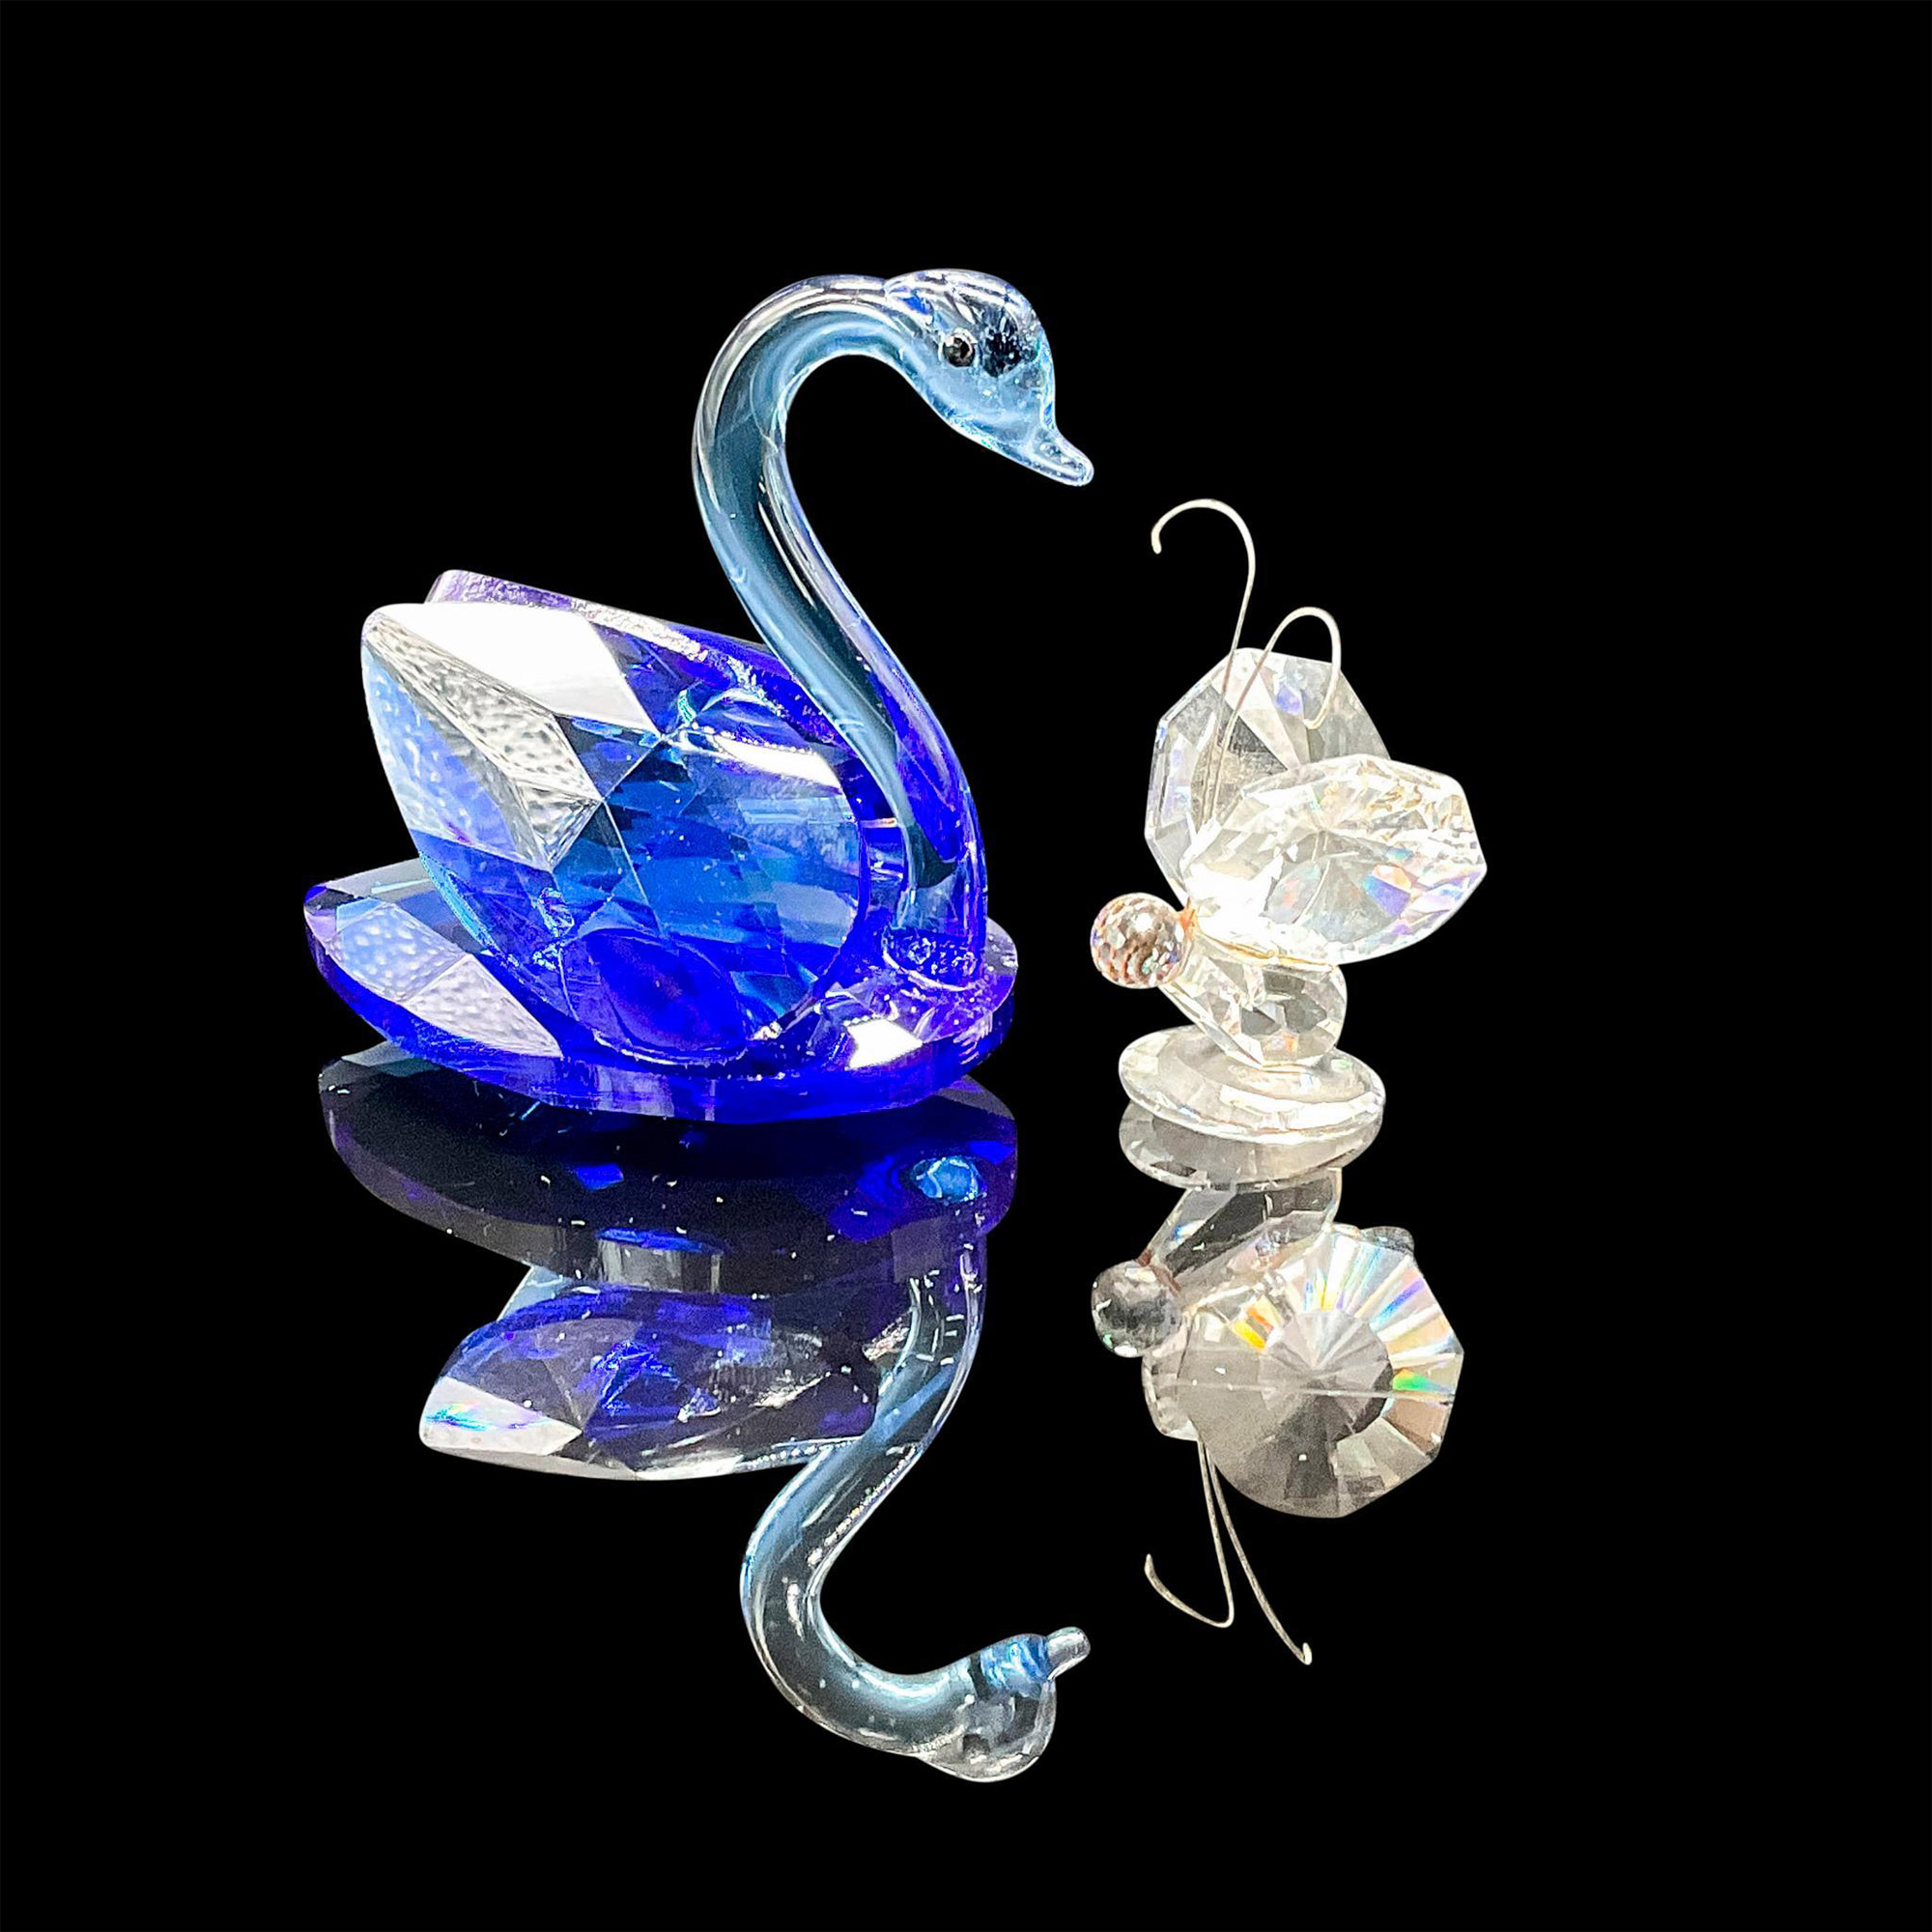 2pc Crystal Figurine Grouping Iris Arc Butterfly & Blue Swan - Image 2 of 3